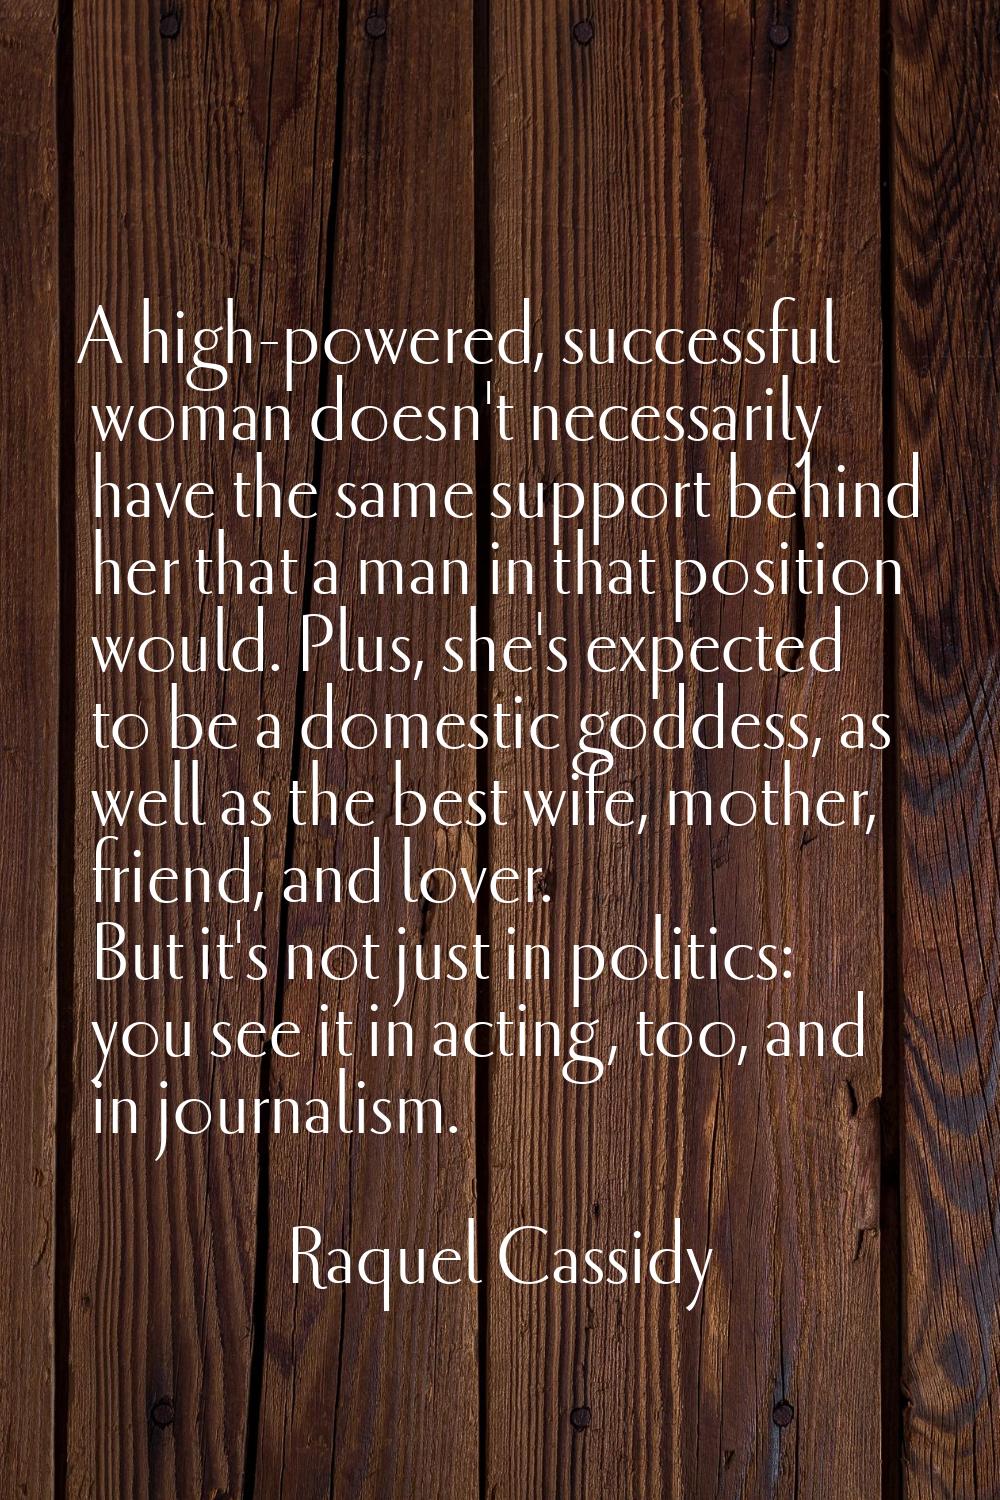 A high-powered, successful woman doesn't necessarily have the same support behind her that a man in